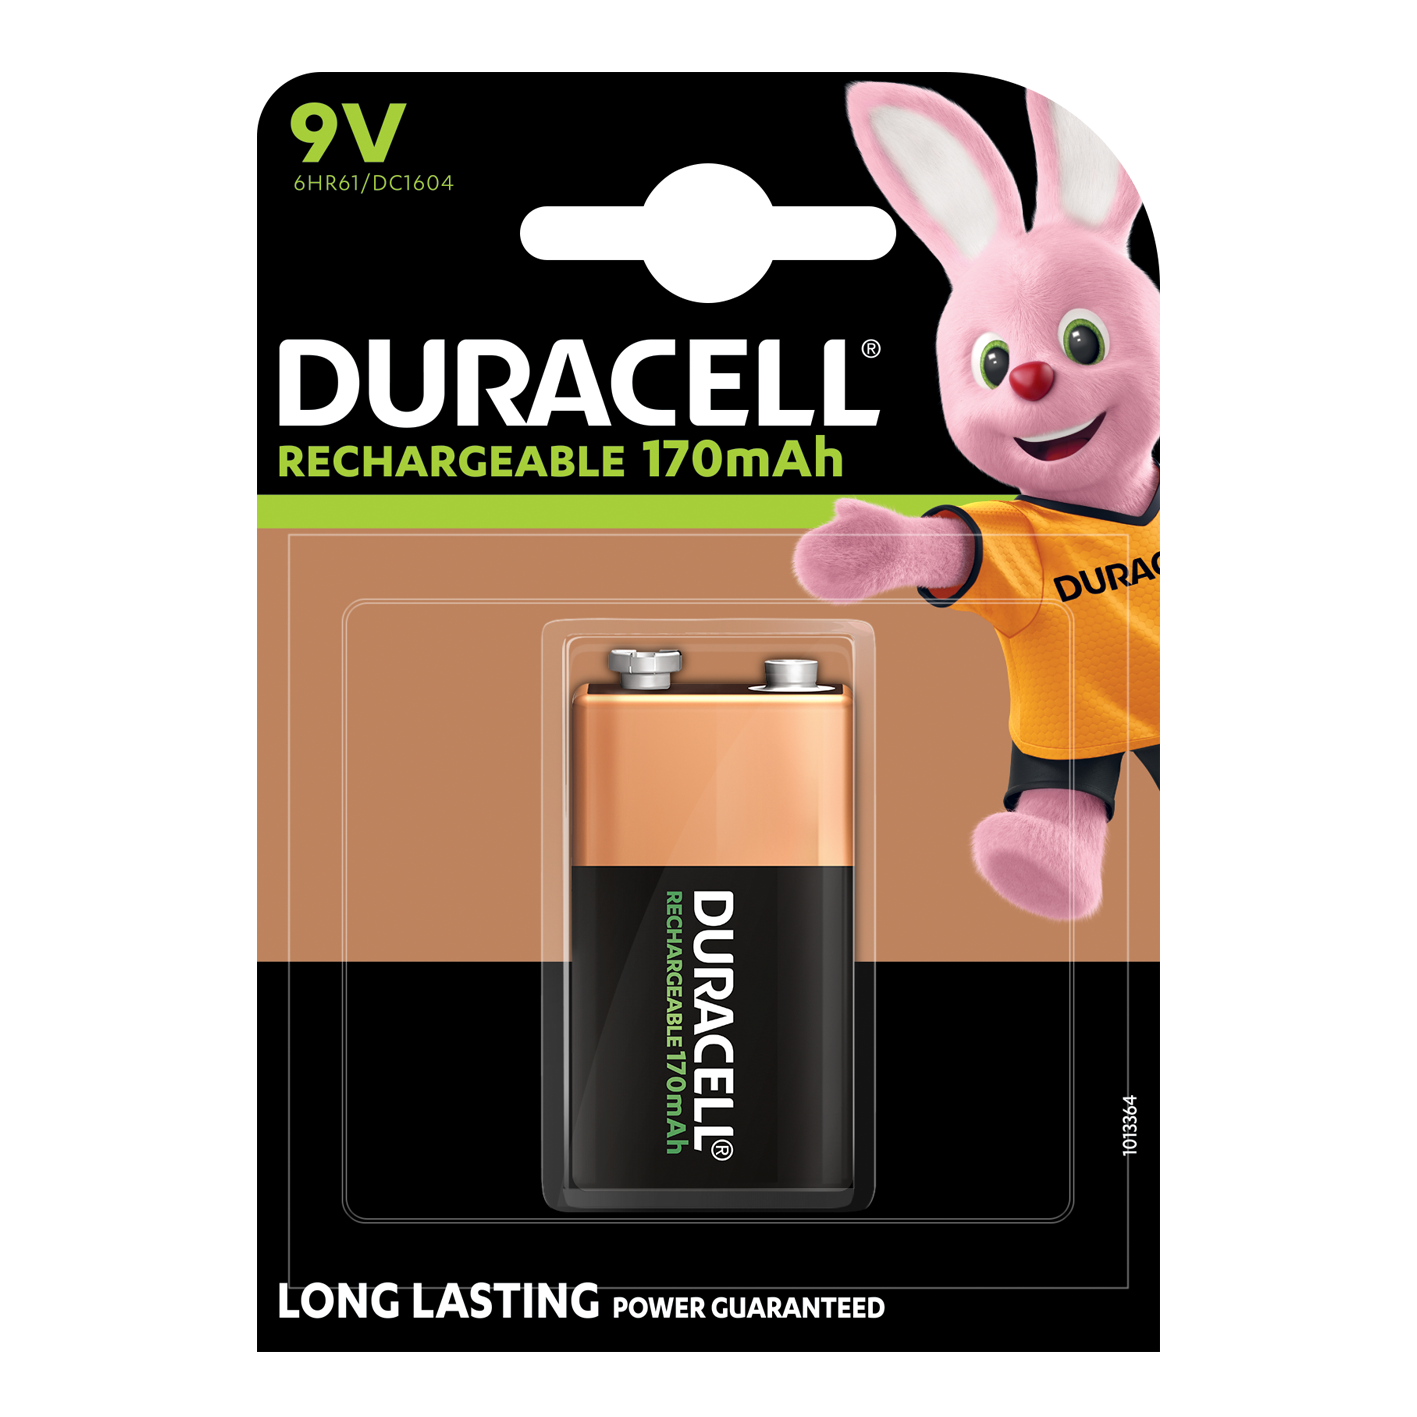 Duracell 9V 170mAh Recharge, Pack of 1